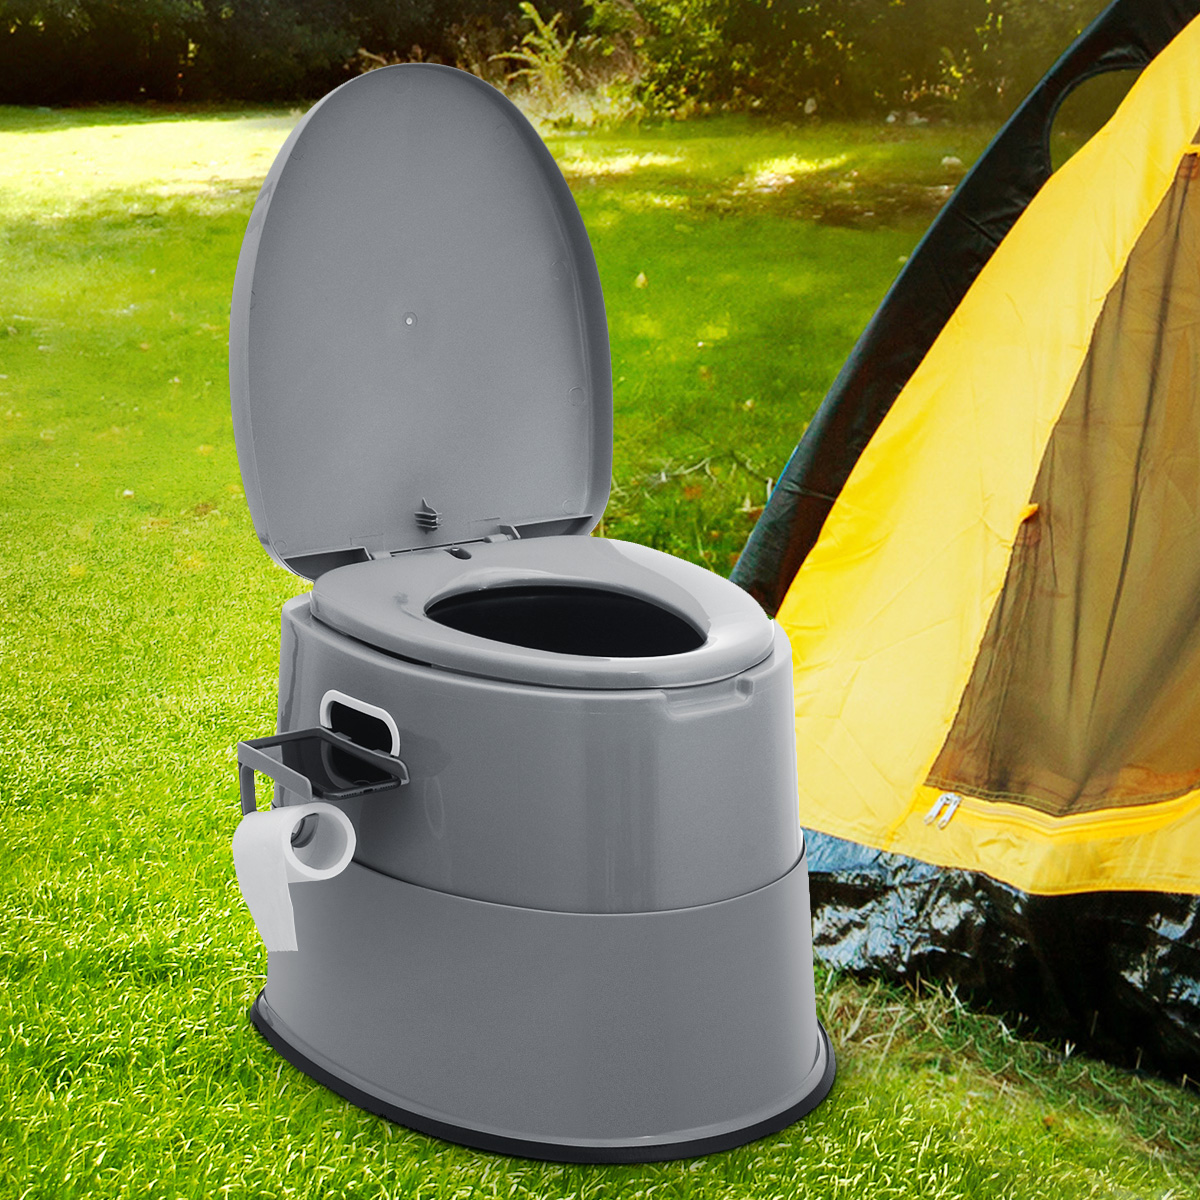 Well, this might not be an actual part of the furniture list, but a camping toilet surely is a much-needed camping essential. These toilets are the perfect solution for all those of you who don’t have any toilet facilities nearby. Portable, compact and lightweight, these easy to move around camping toilets can certainly help you have all the necessities when outdoors.